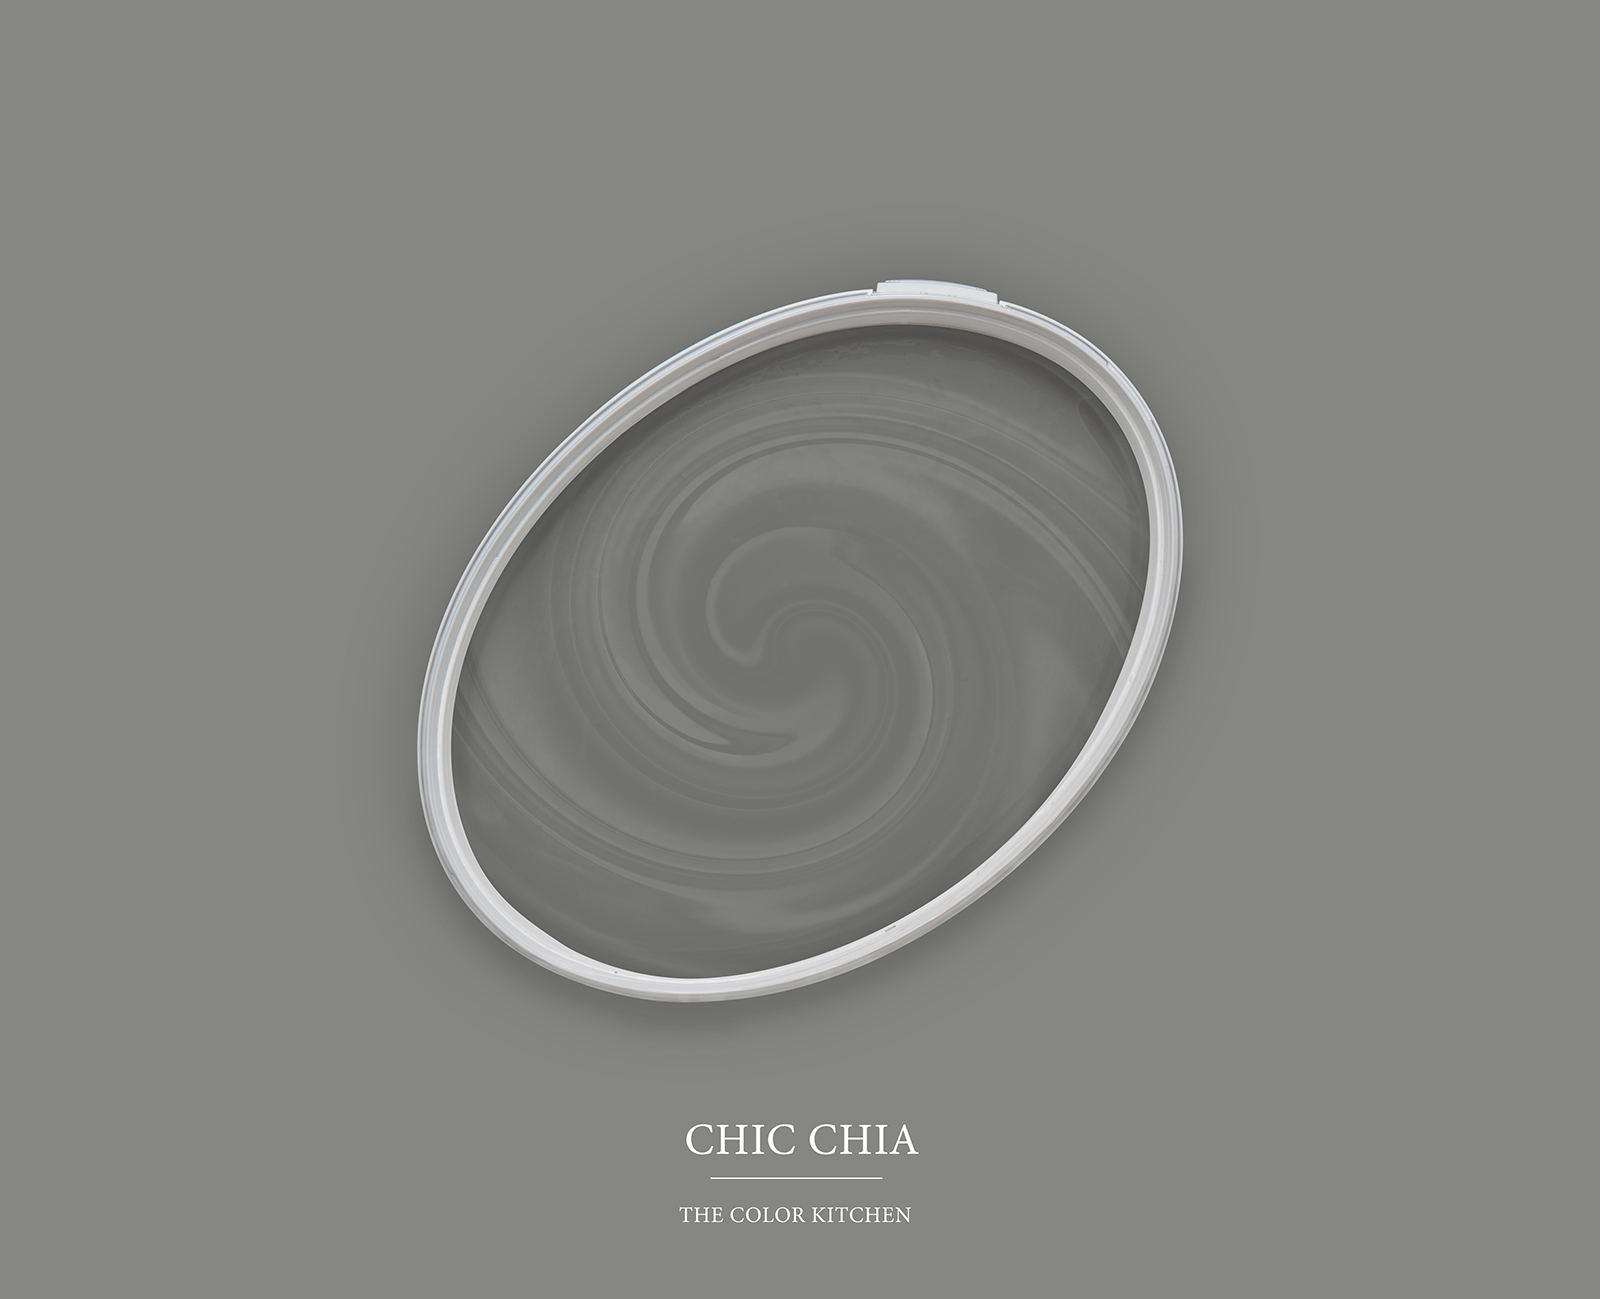         Wall Paint TCK1006 »Chic Chia« in soothing stone grey – 2.5 litre
    